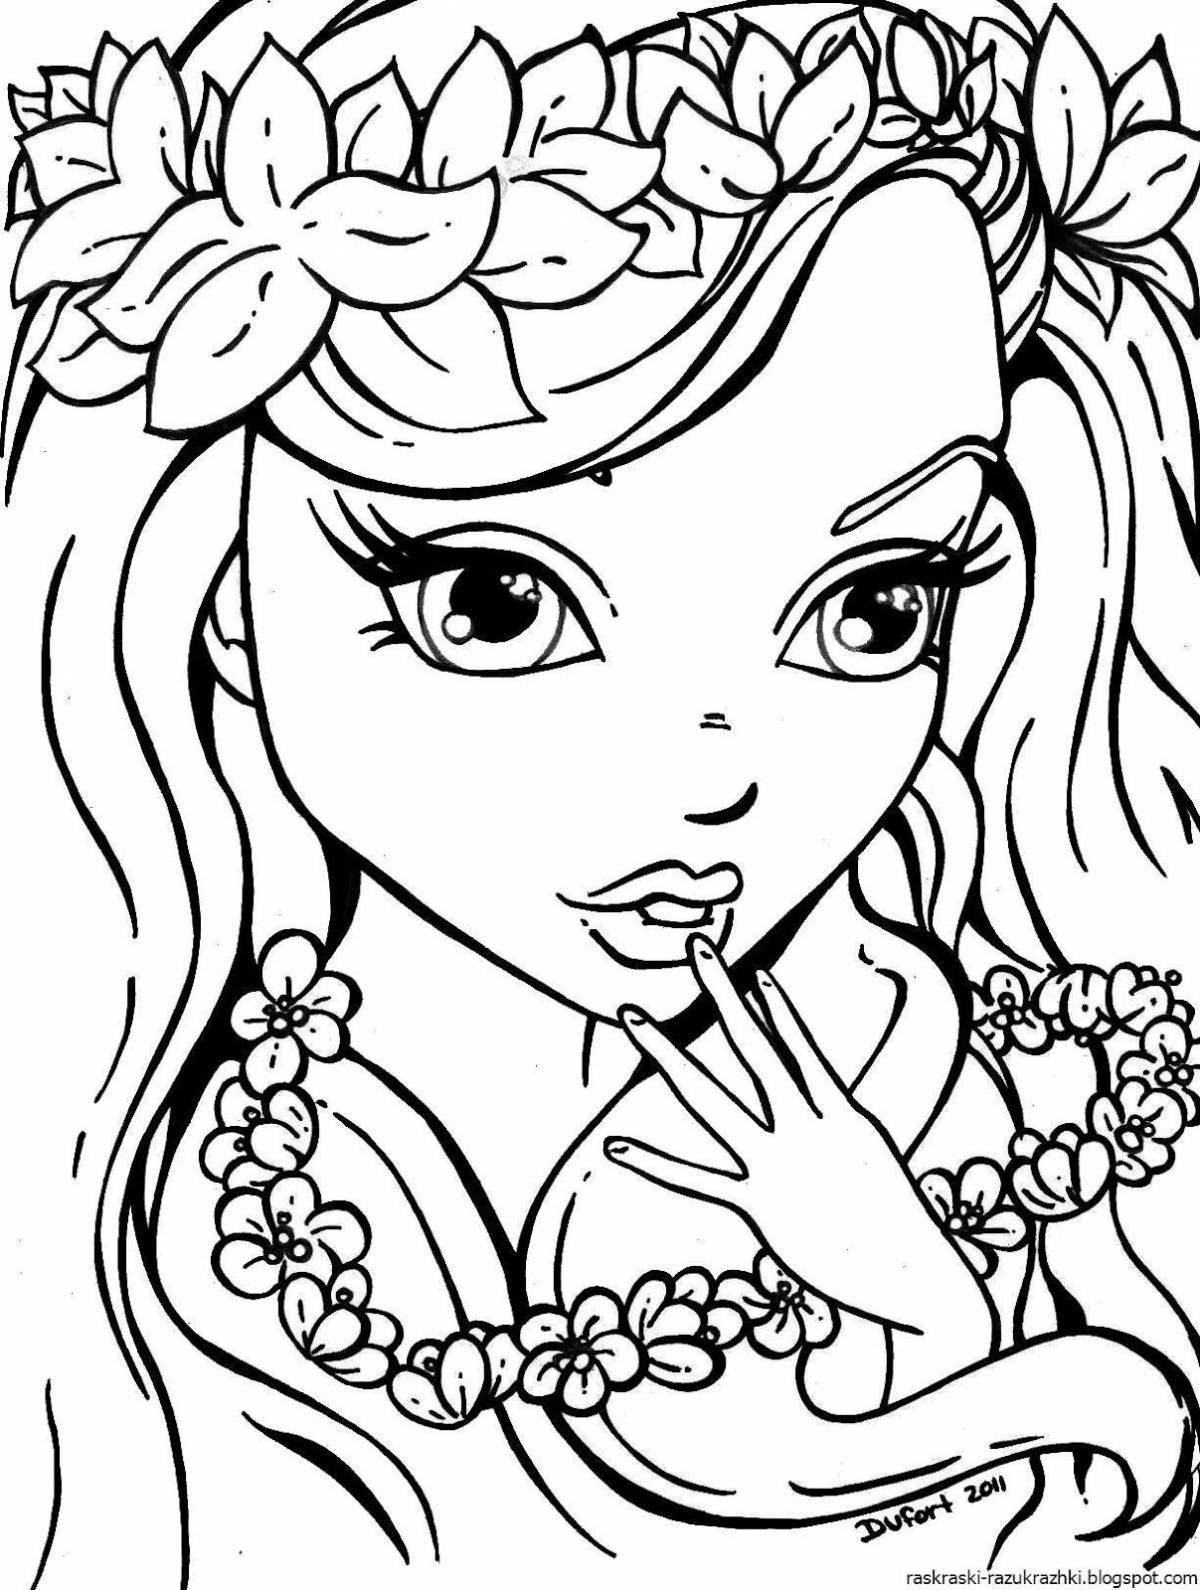 Color-bright coloring page for children aged 13-14